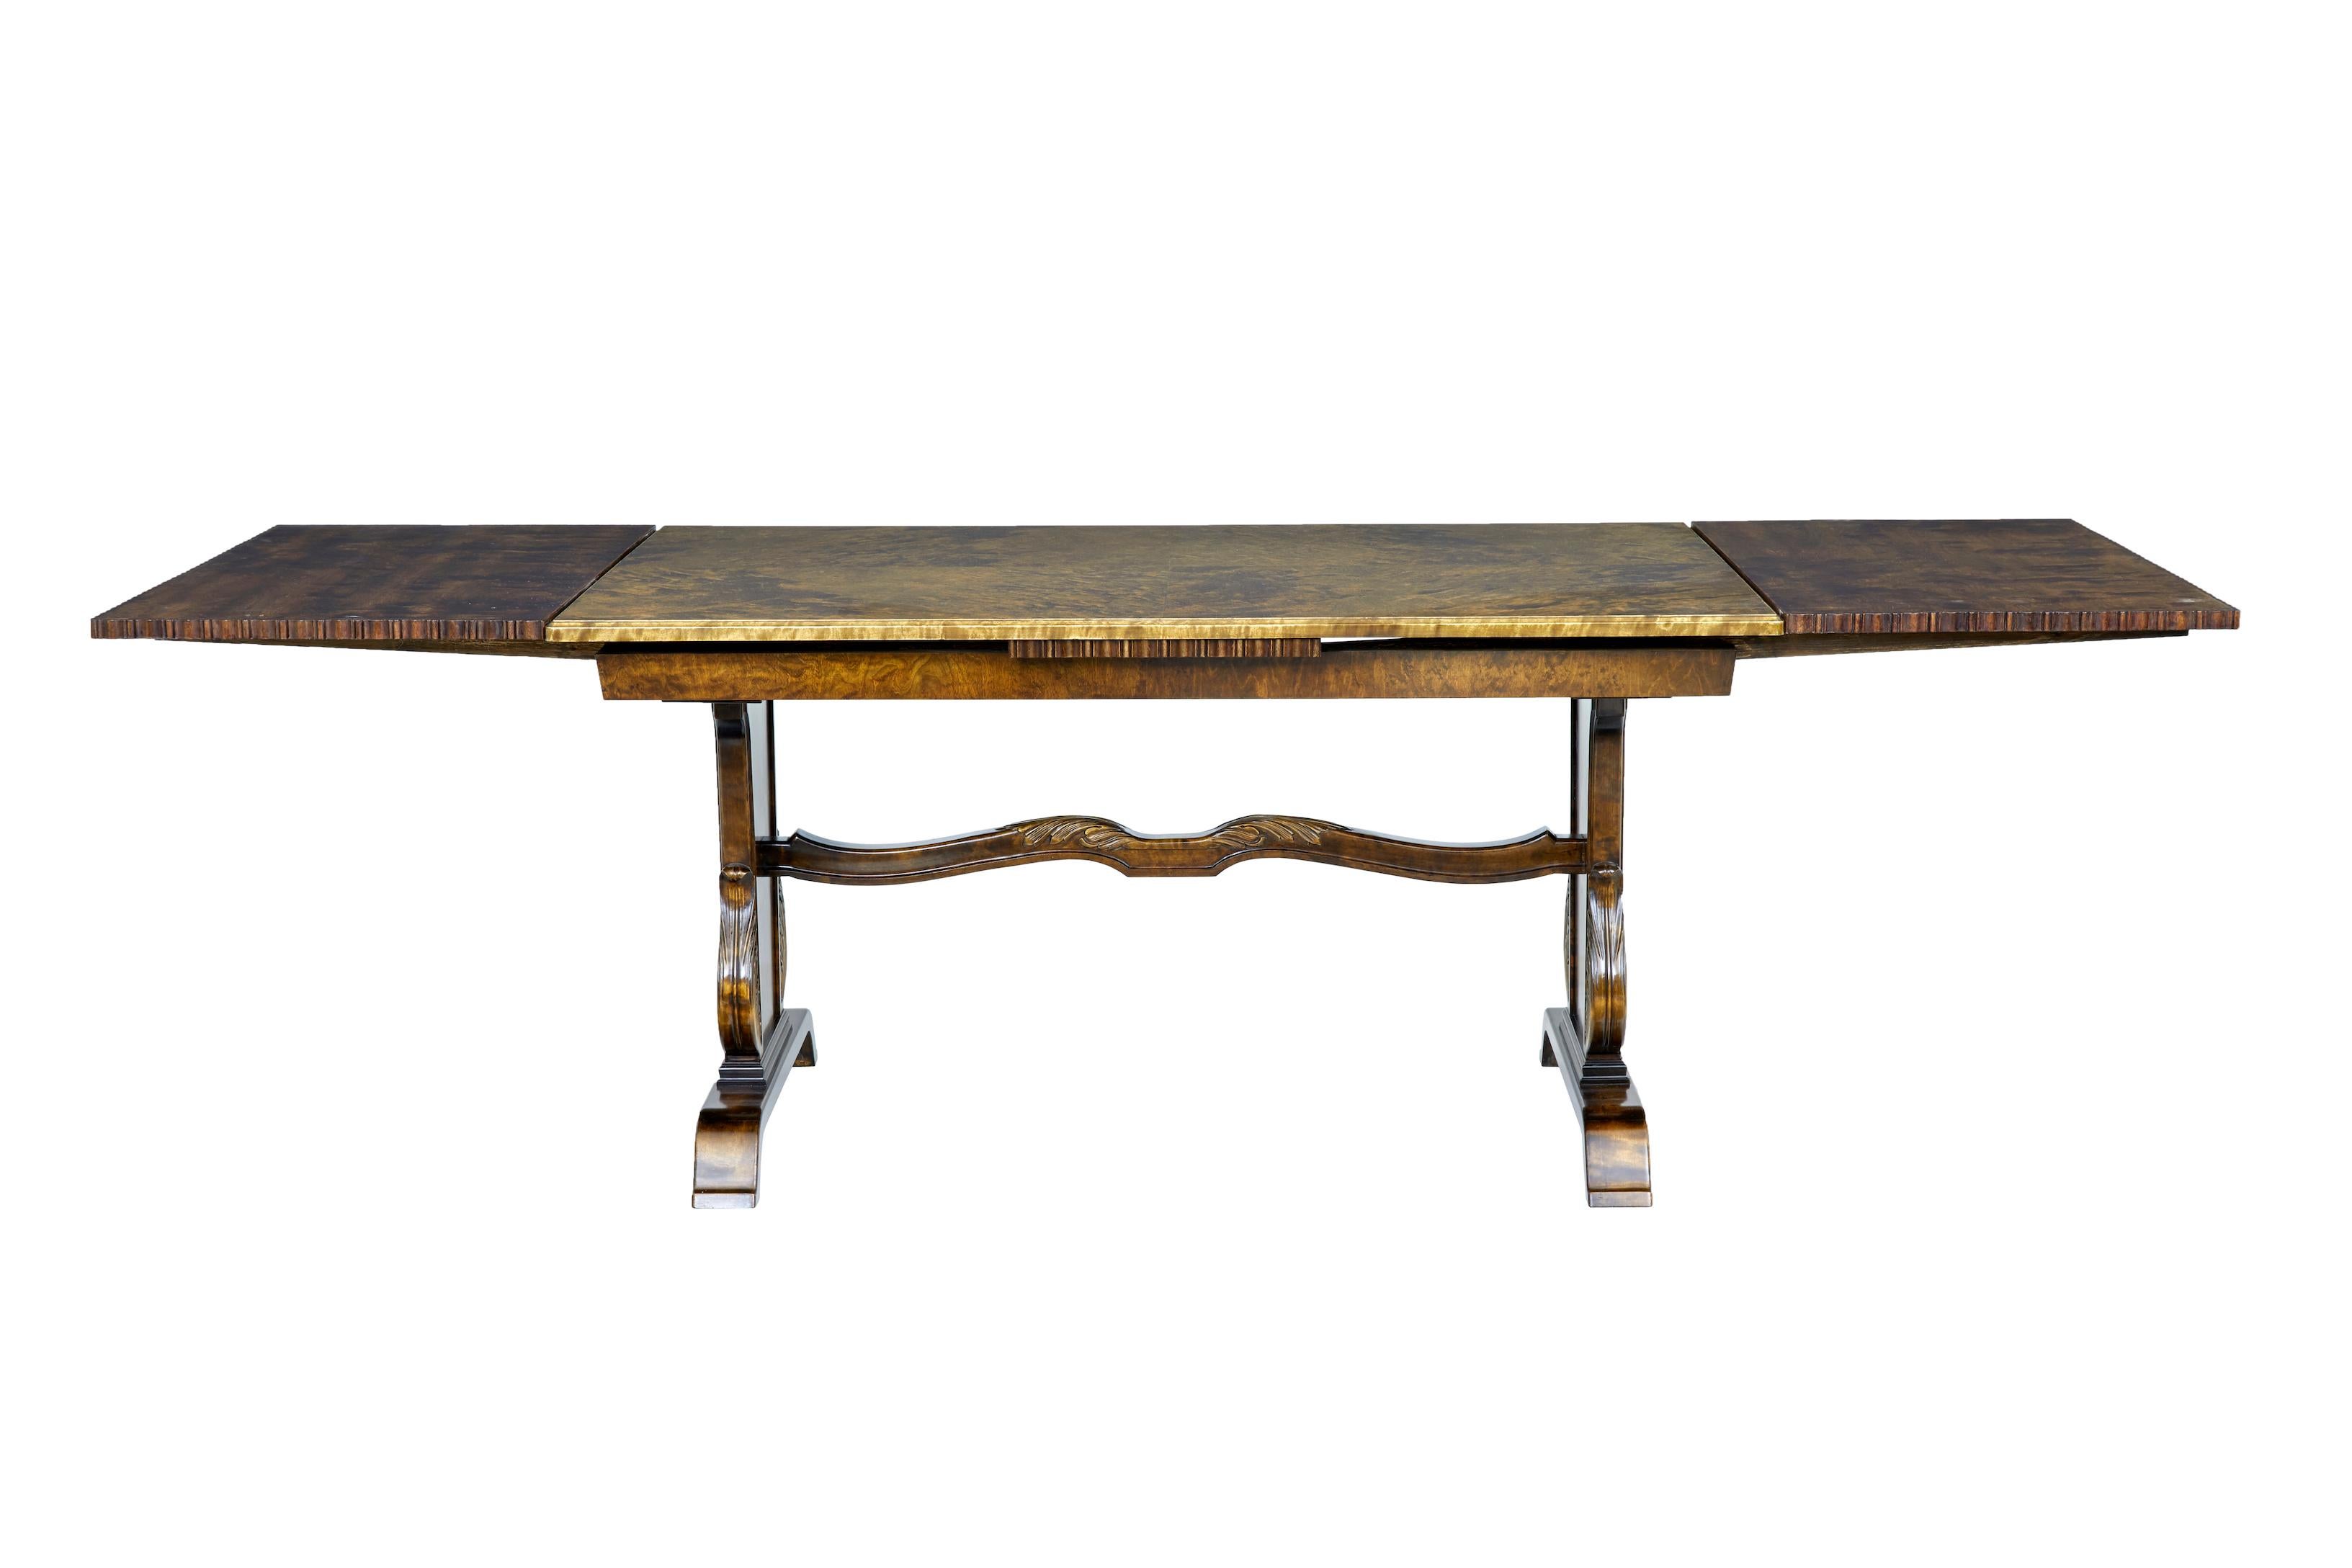 Fine quality late Art Deco carved birch dining table, circa 1940.

Made by Swedish company Bodafors smf.

Quarter veneered burr birch top surface with a draw leaf on each end, allowing it to seat upto 10 people. Standing on a tapering base with